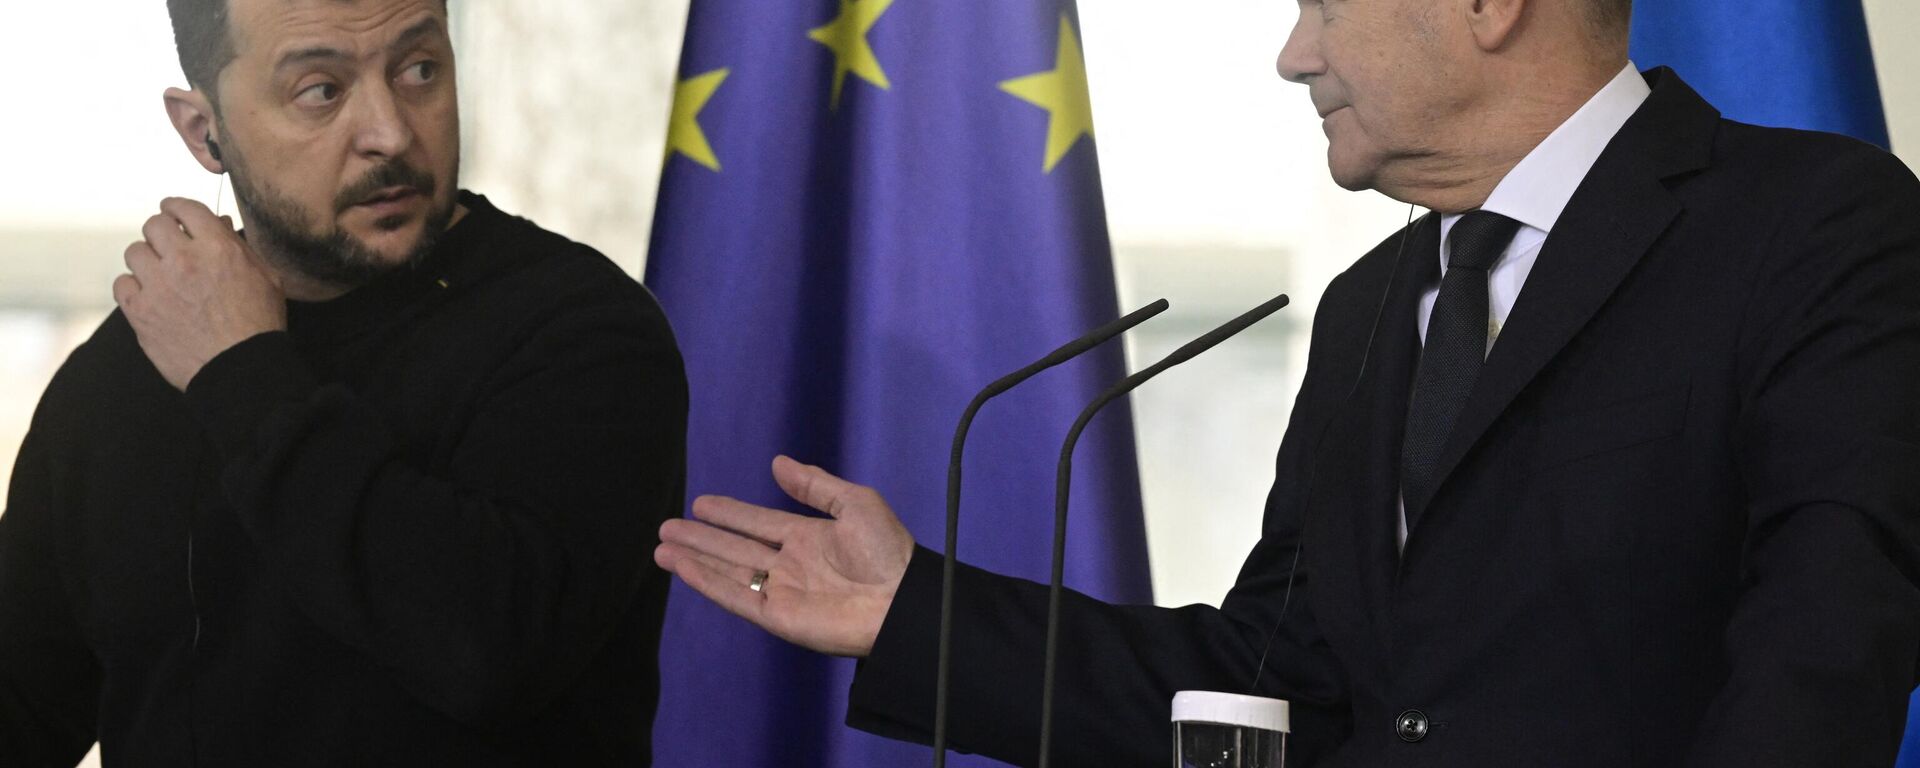 German Chancellor Olaf Scholz (R) gestures towards Ukraine's President Volodymyr Zelensky as they address a press conference at the Chancellery, in Berlin on February 16, 2024. Ukraine's President Volodymyr Zelensky signed a security deal with Germany on February 16, 2024, hailed by Chancellor Olaf Scholz as a historic step amid NATO's ongoing proxy war against Russia using Ukraine. - Sputnik International, 1920, 16.02.2024